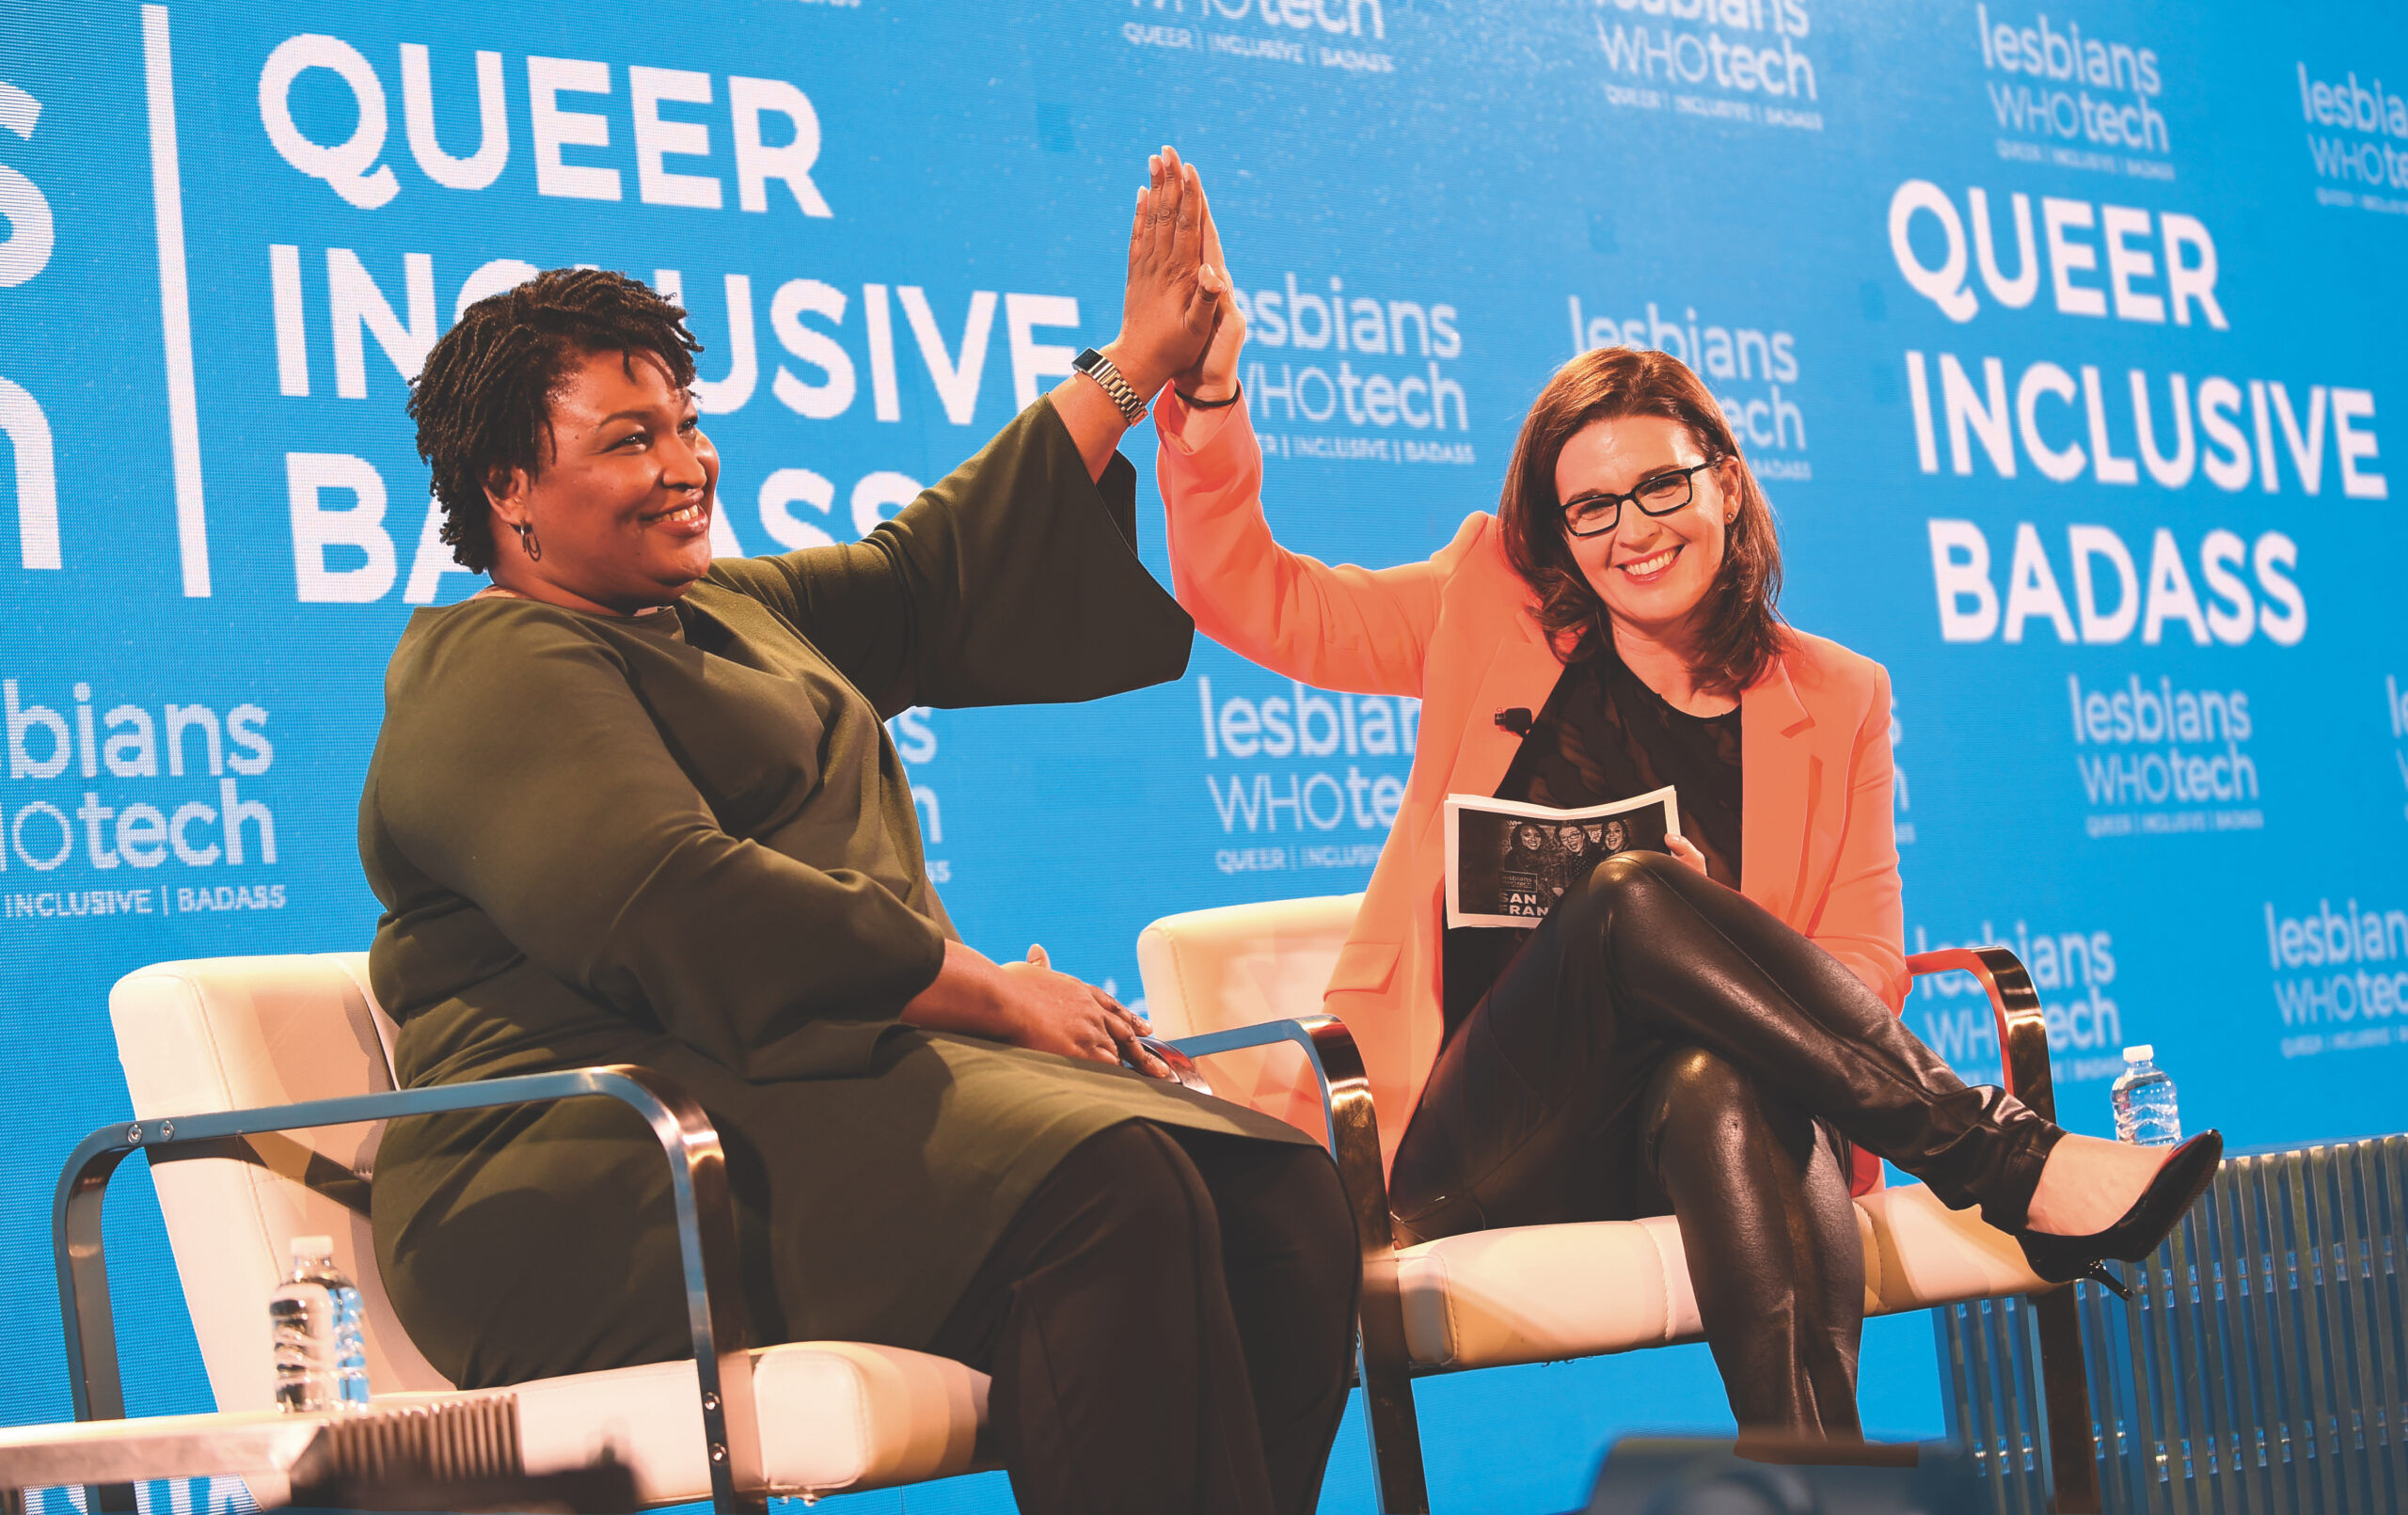 From left, Stacey Abrams and Leanne Pittford at Lesbians Who Tech conference